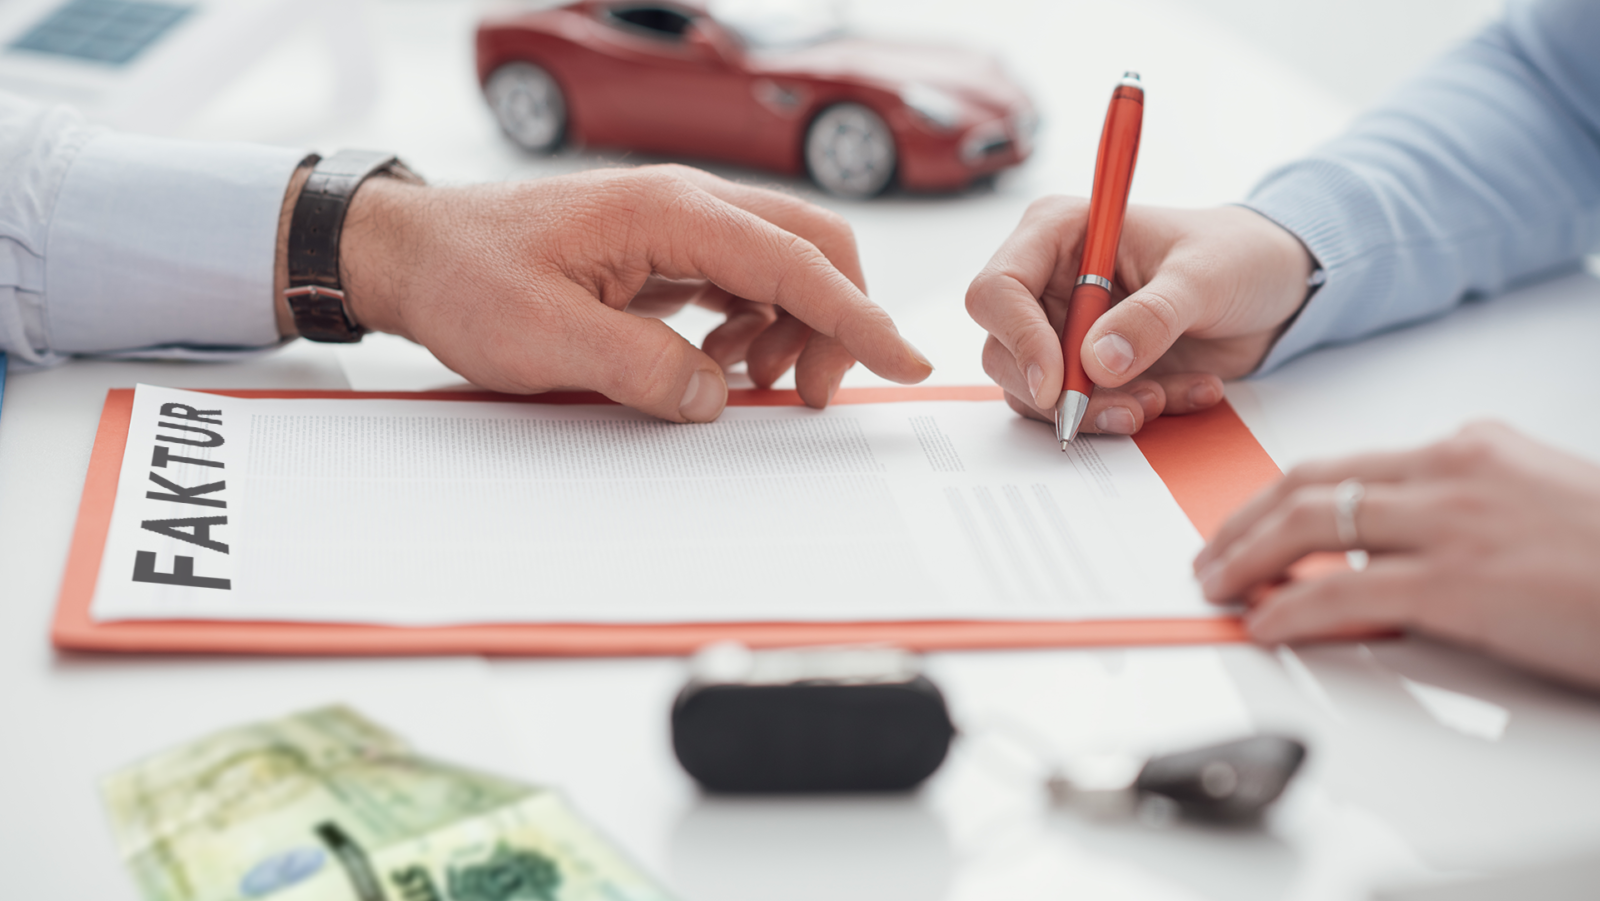 Image Get to Know the Function of Vehicle Invoice for a New Car